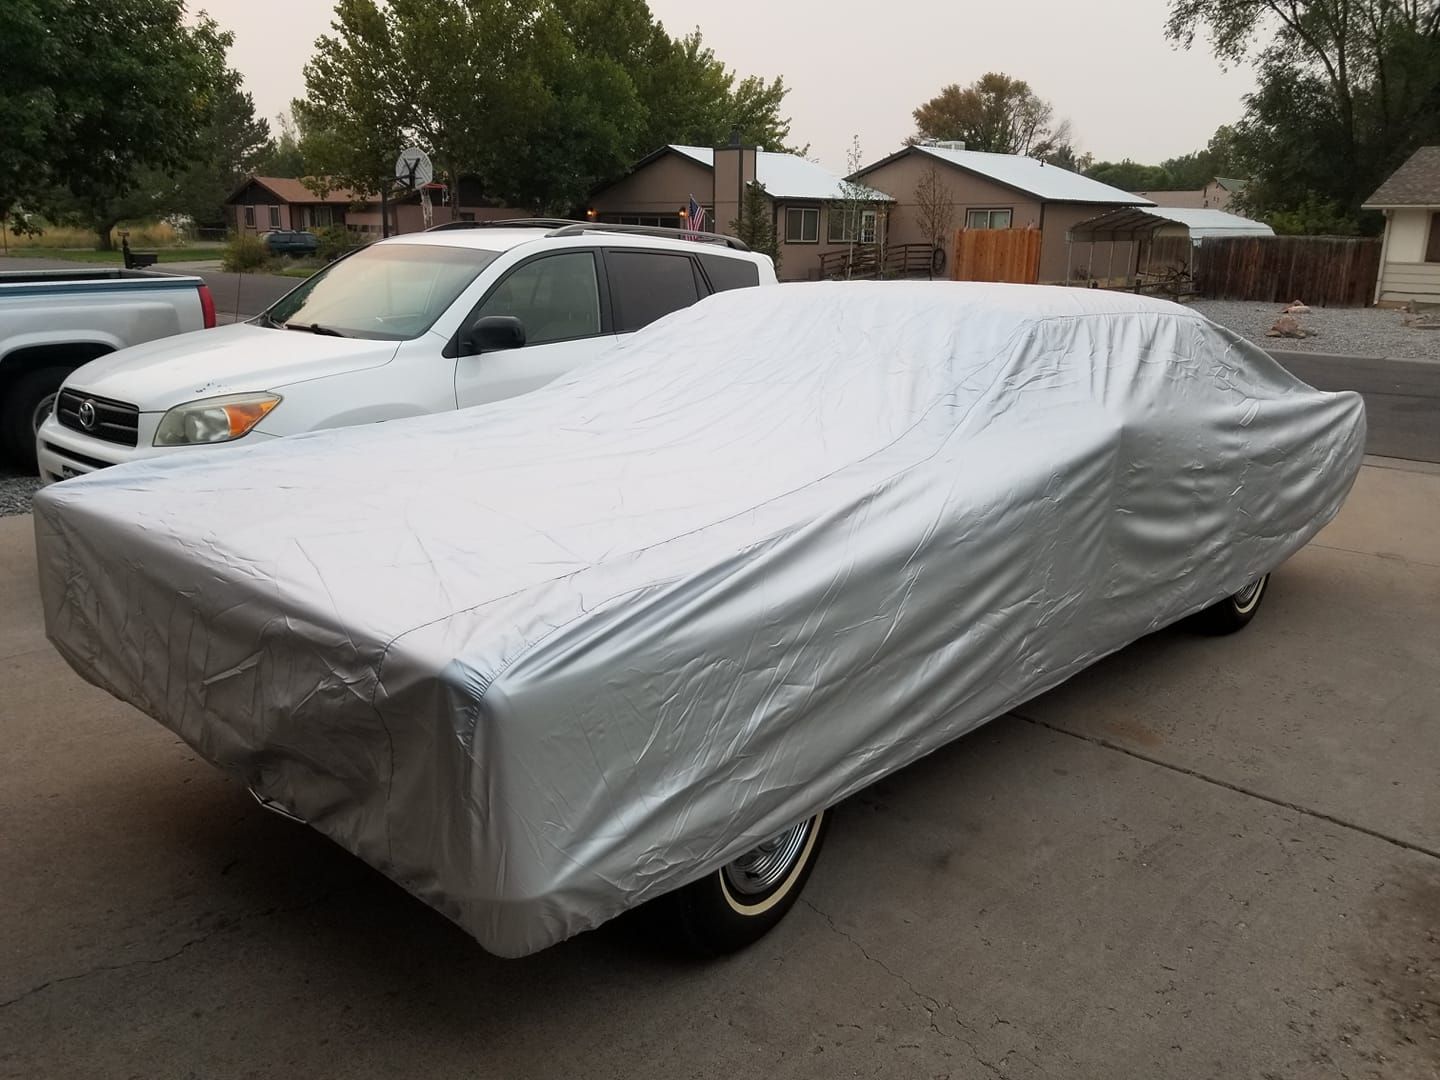 Car covers can preserve the exterior